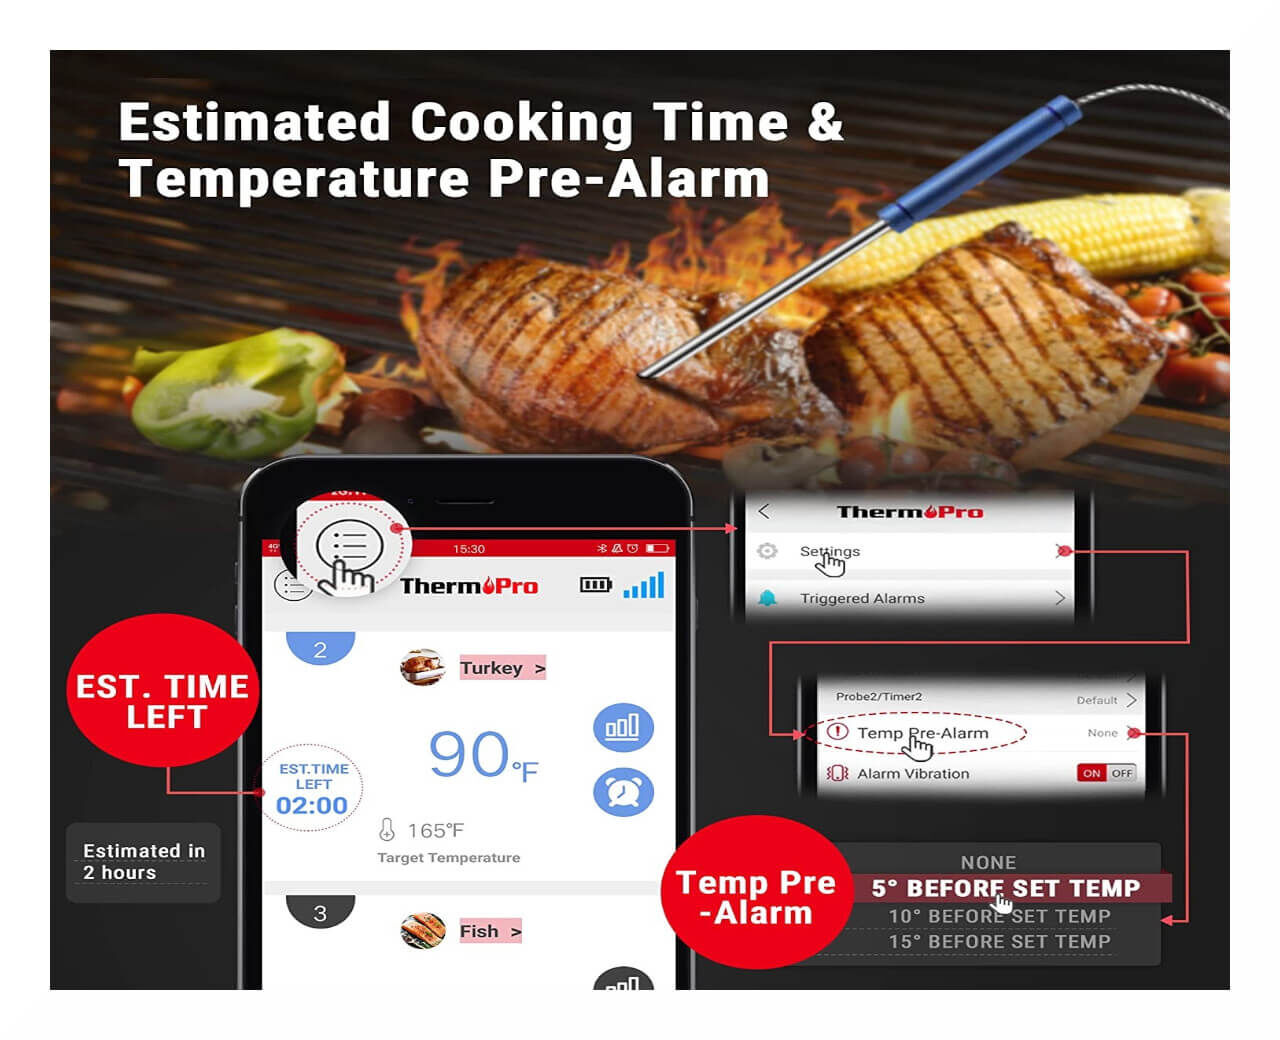 ThermoPro TP-25 Review – Is it worth buying a multi-probe meat